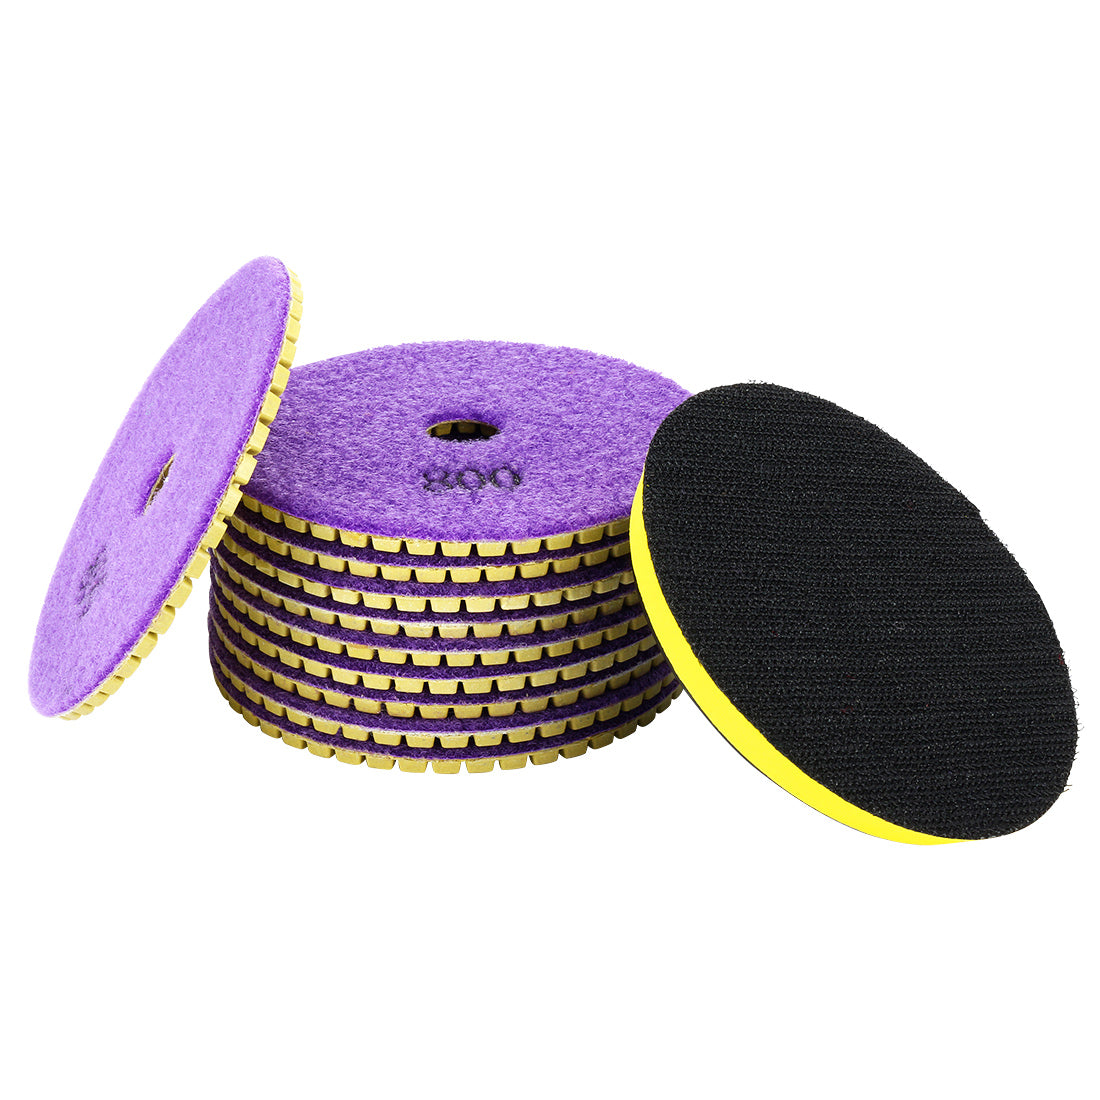 uxcell Uxcell 4" Diamond Wet Polishing Pad Grit 800 10pcs for Granite Concrete Marble